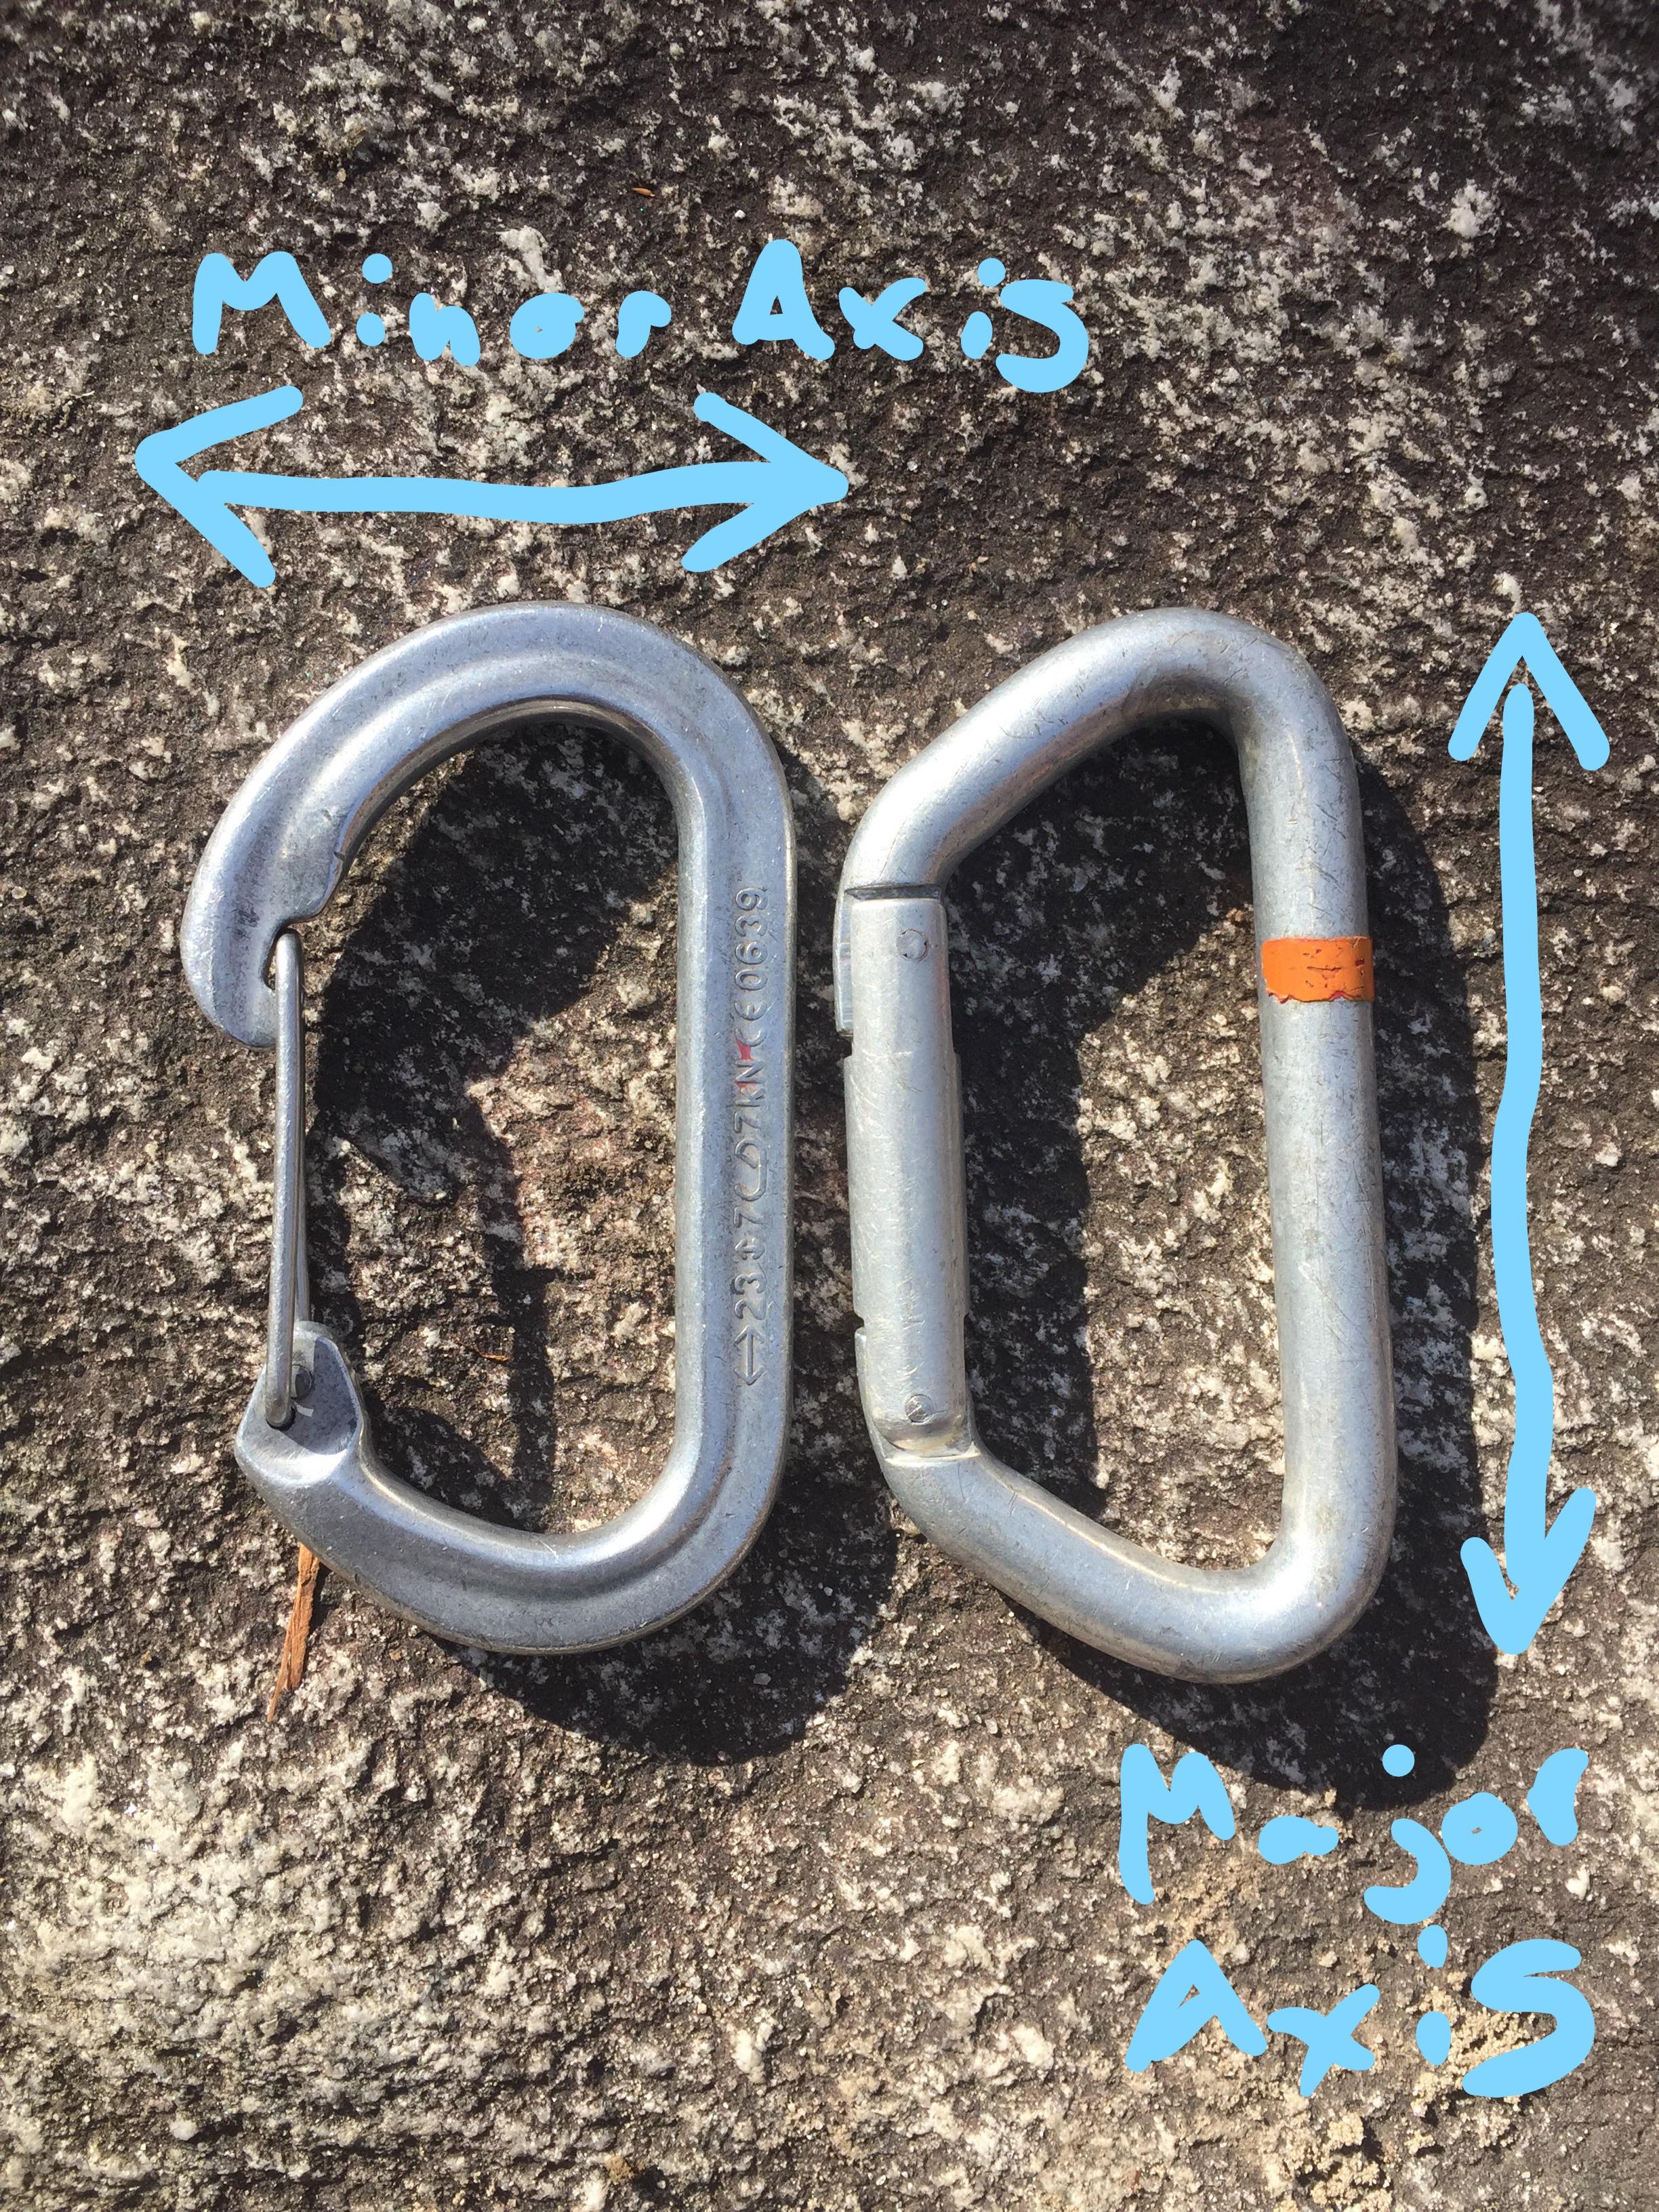 A Climber's Guide to Carabiners - Go Outside - Blue Ridge Outdoors